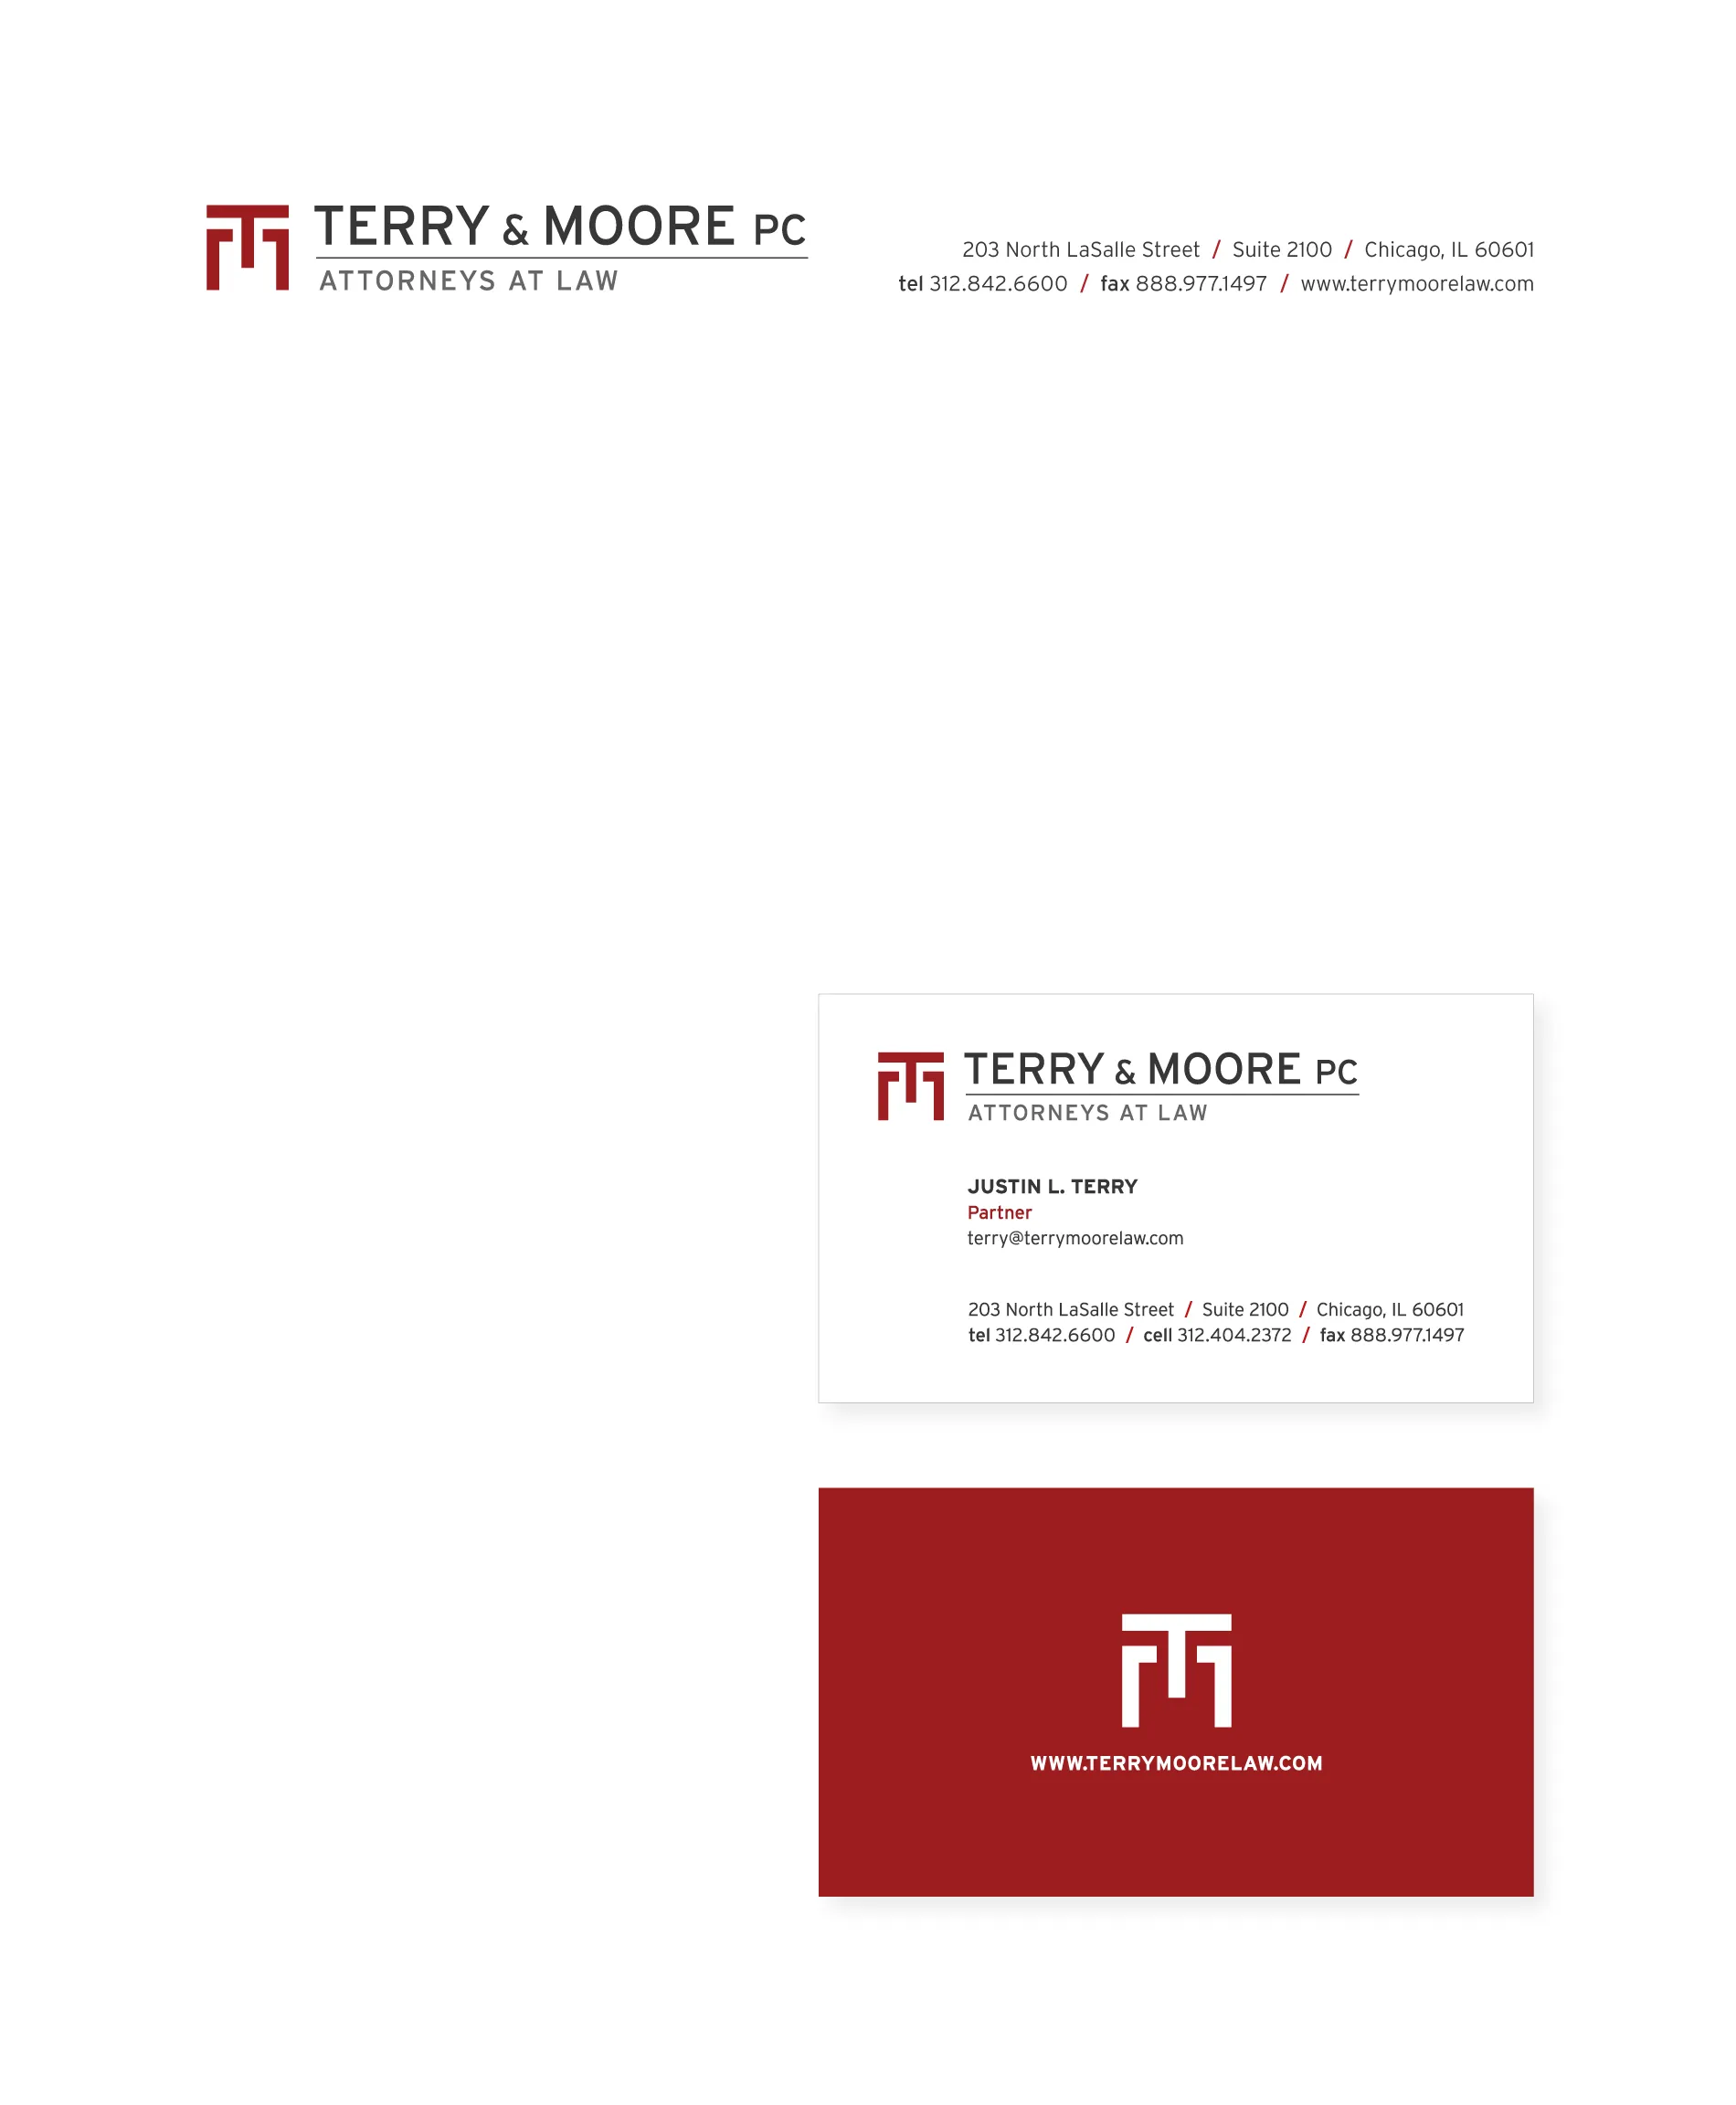 Terry & Moore letterhead and business card design